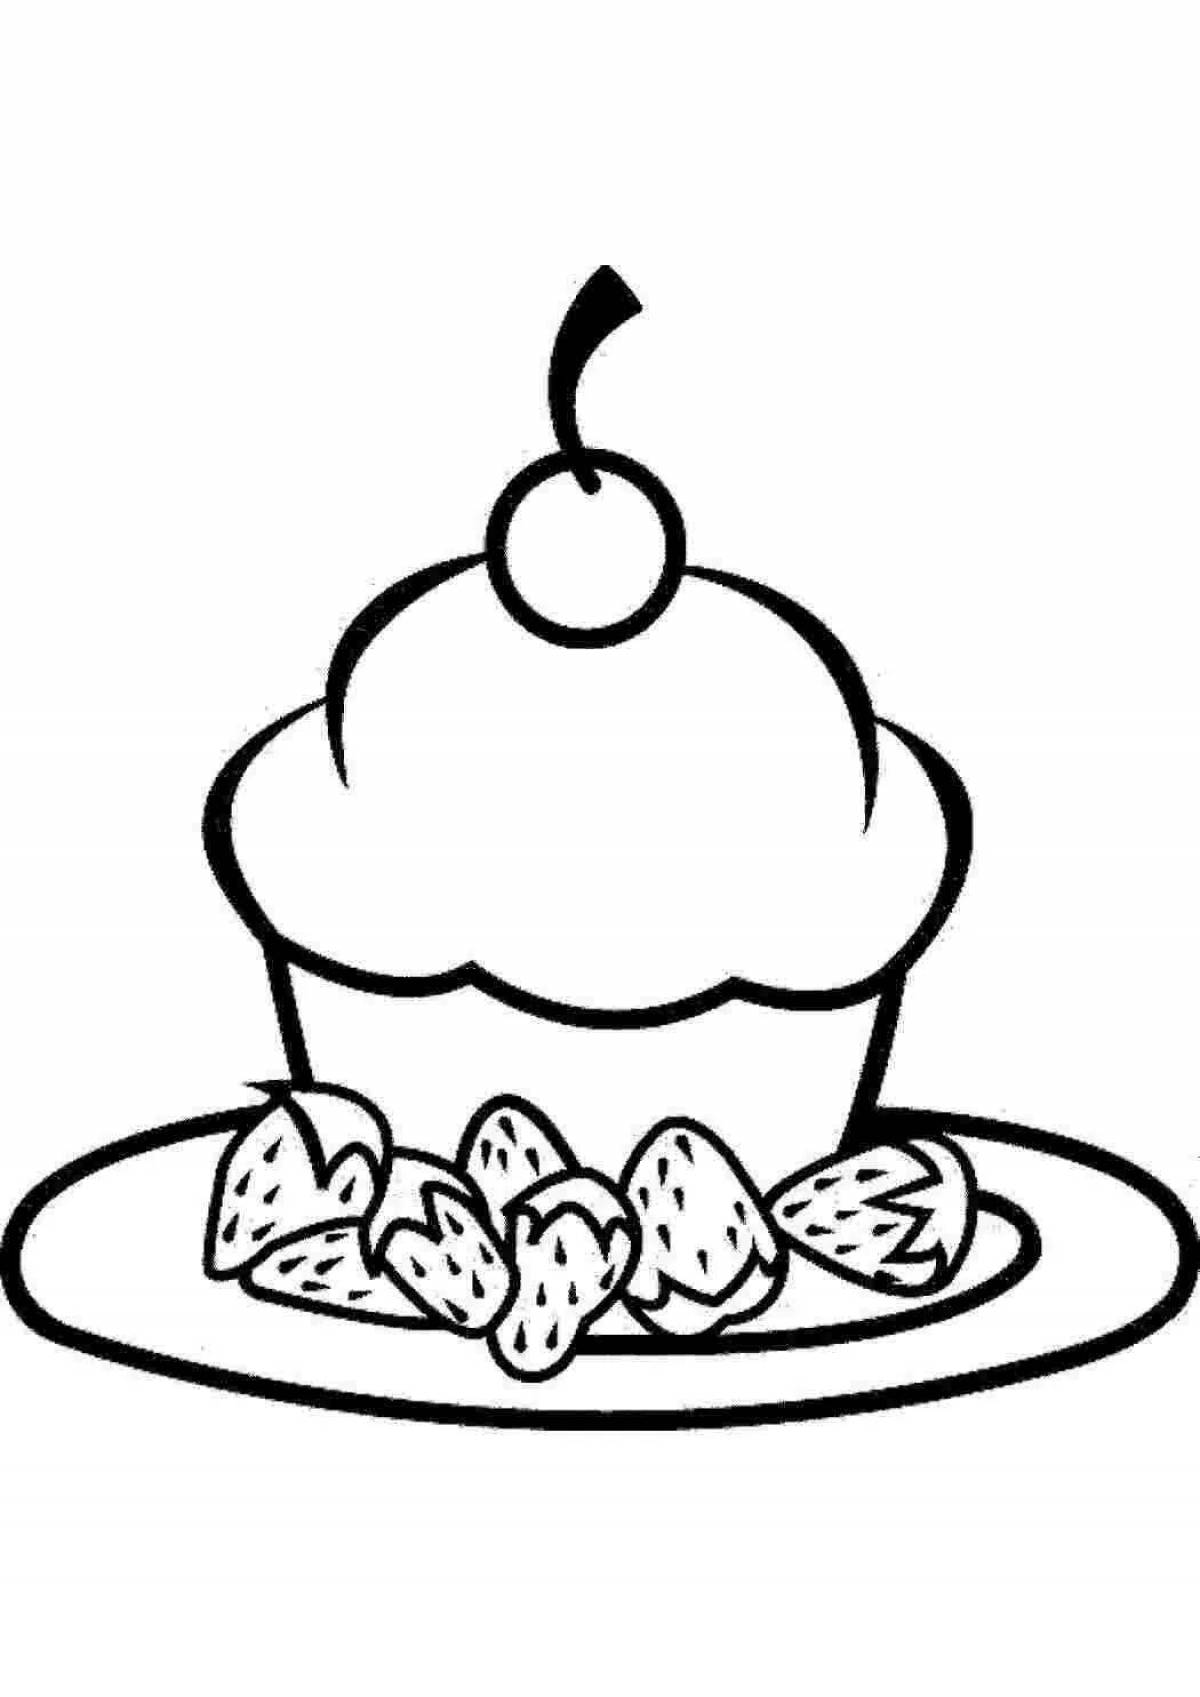 Tempting dessert coloring page